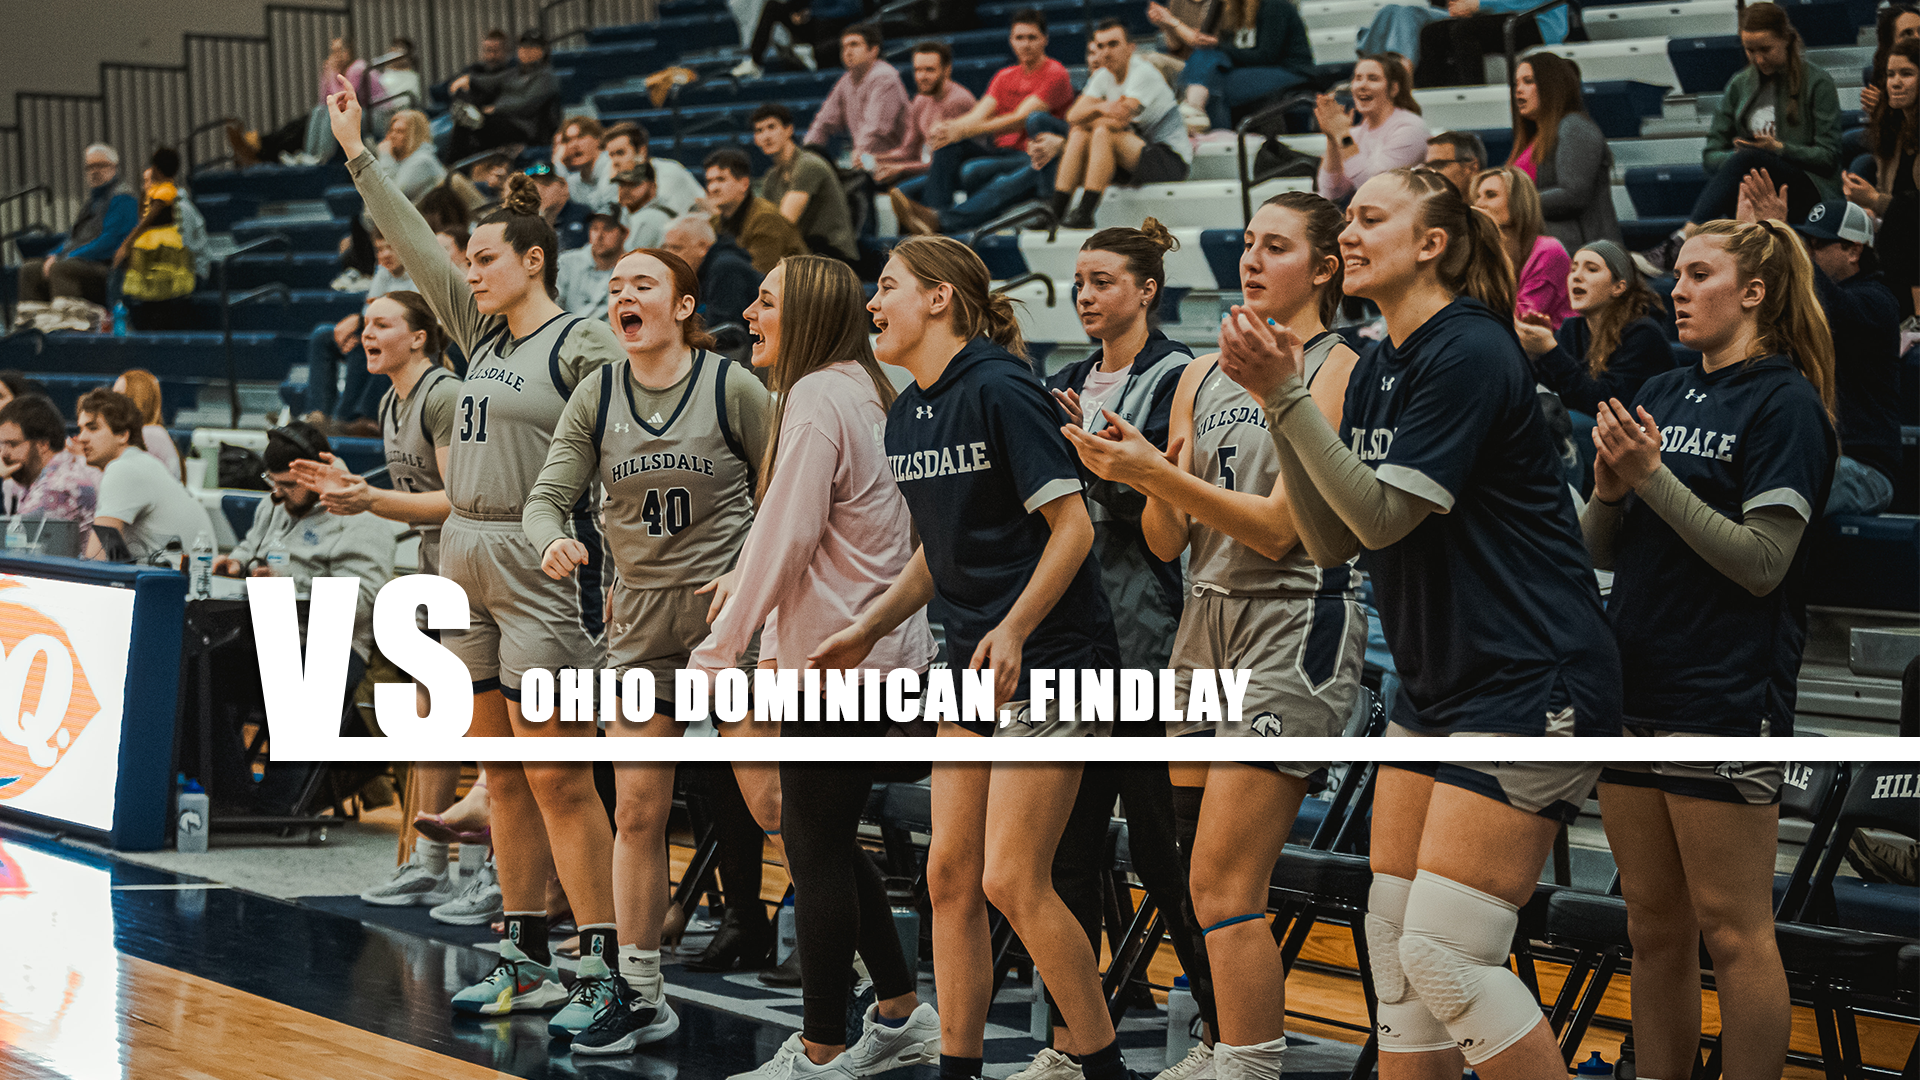 Preview: Chargers make final road trip of regular season to battle Ohio Dominican, Findlay